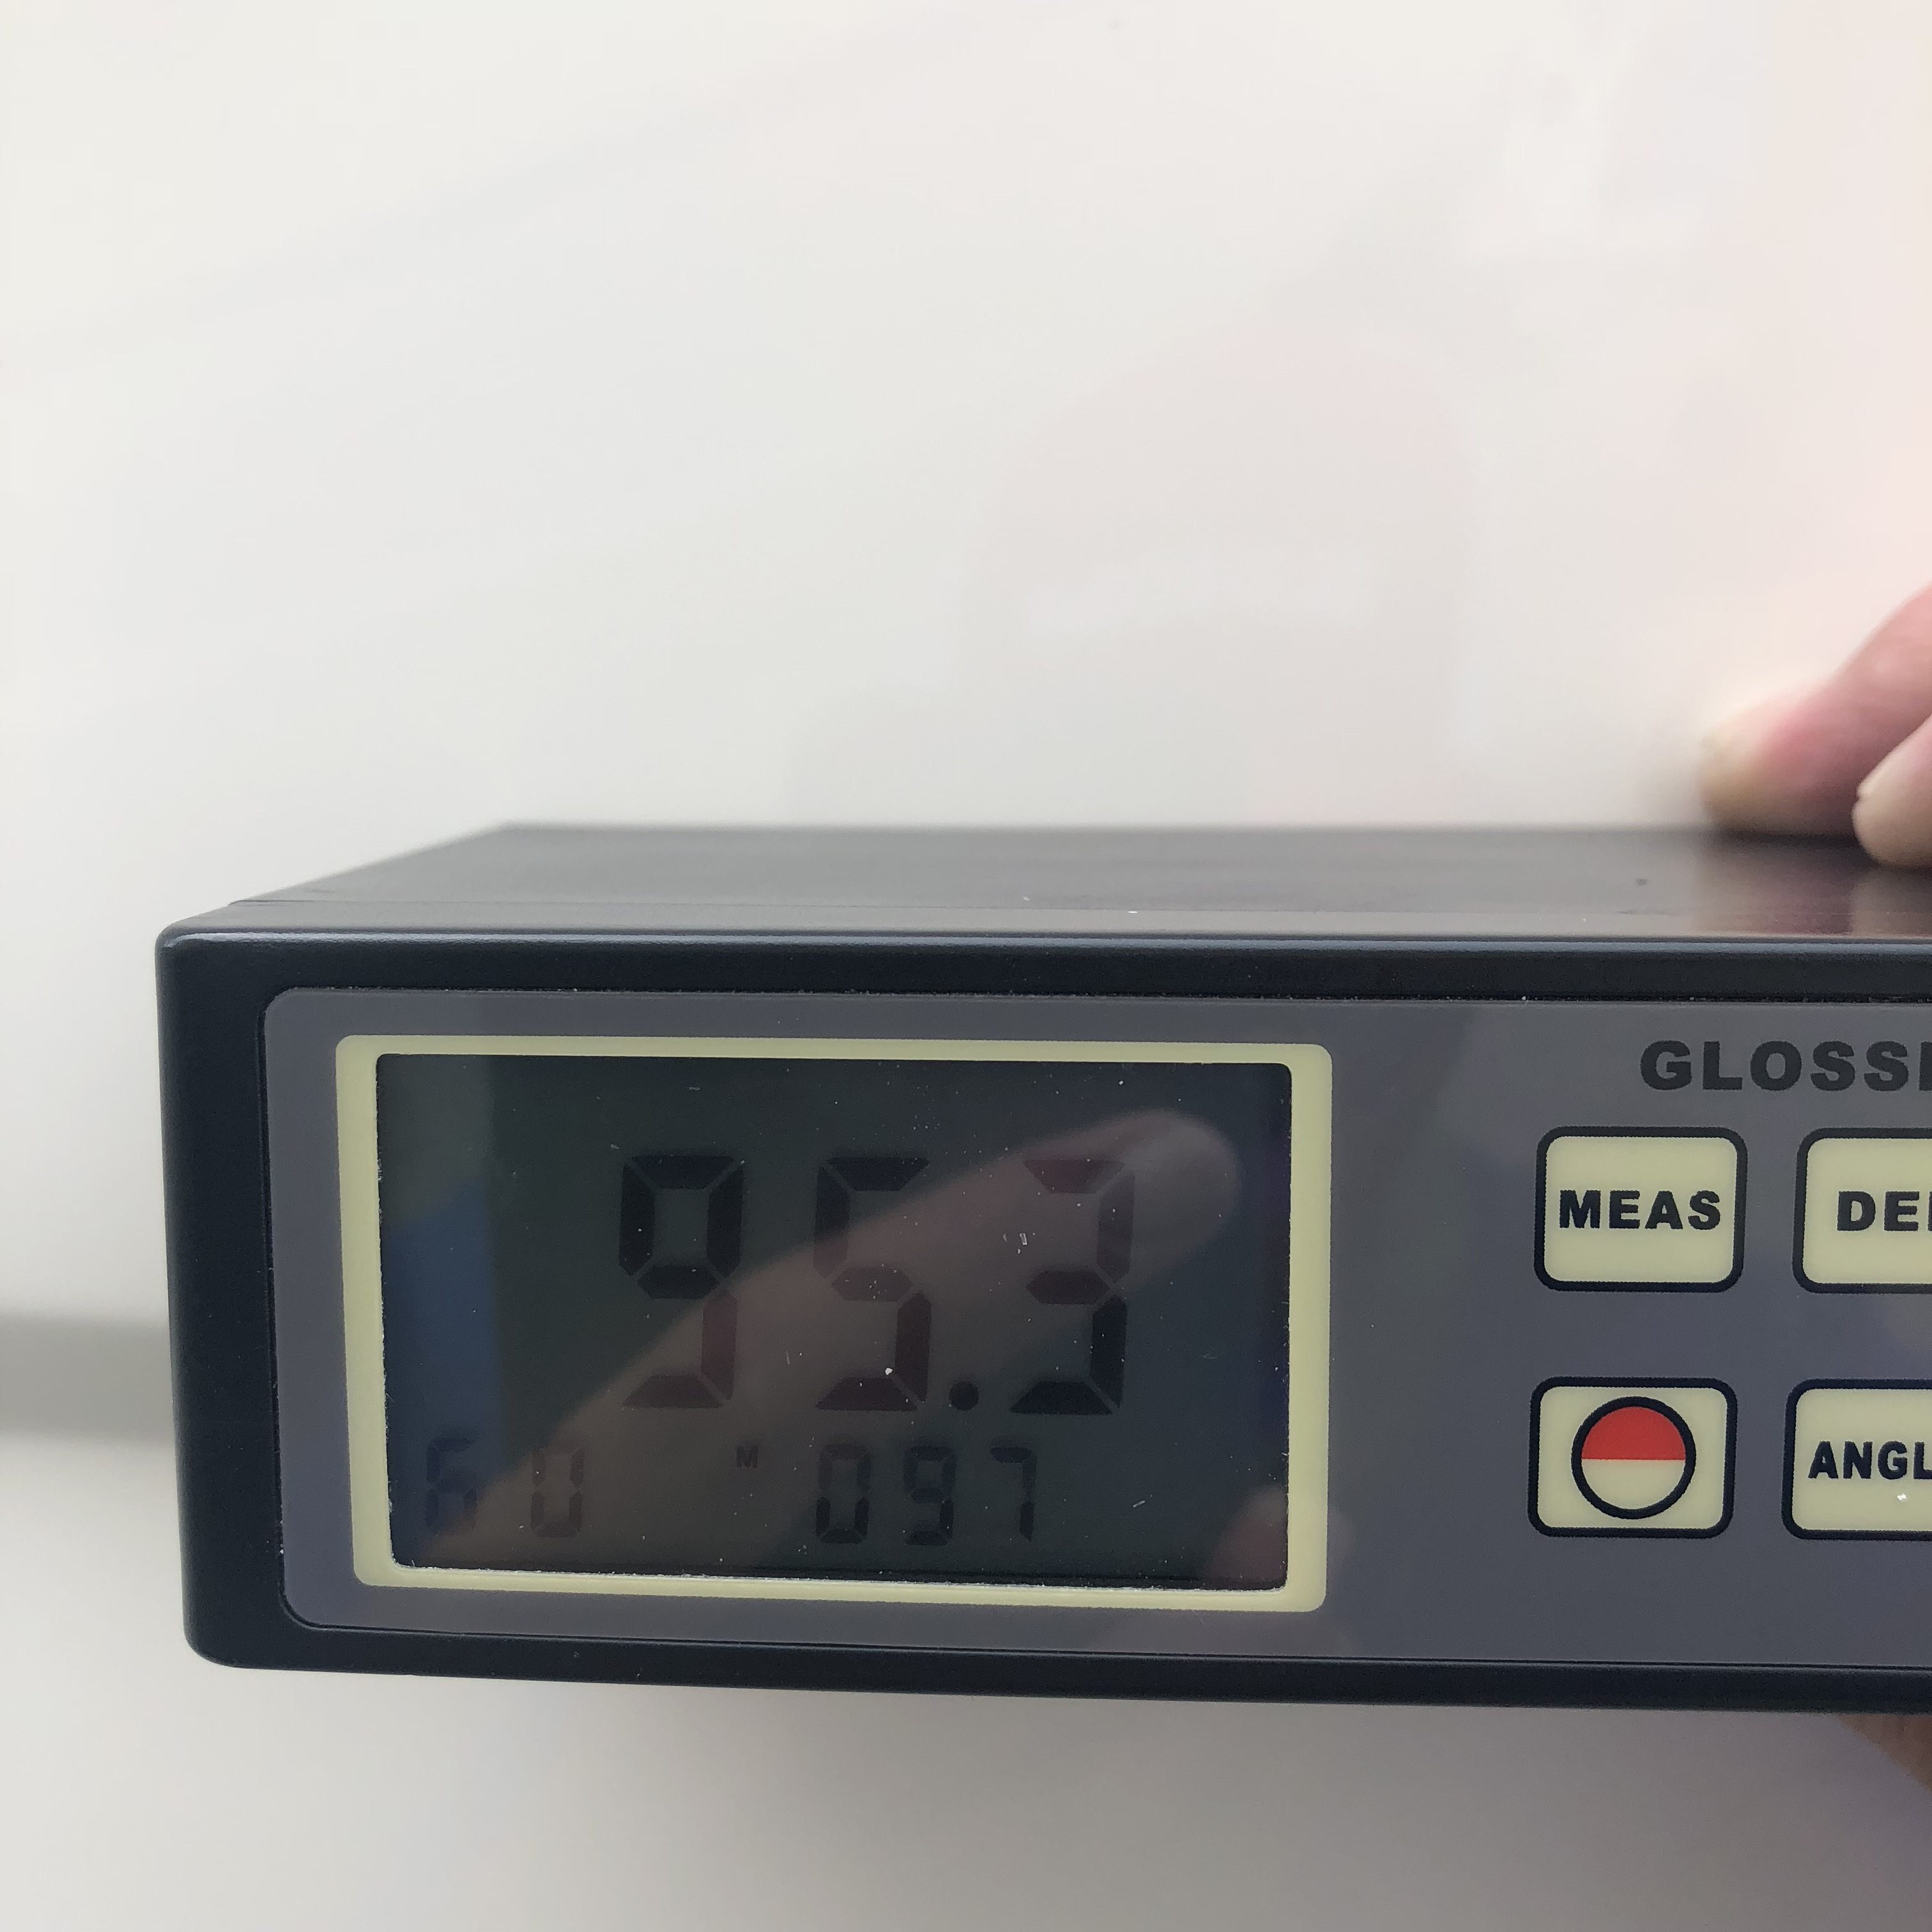 95.3 gloss meter reading on Robalo after Glidecoat ceramic coating application